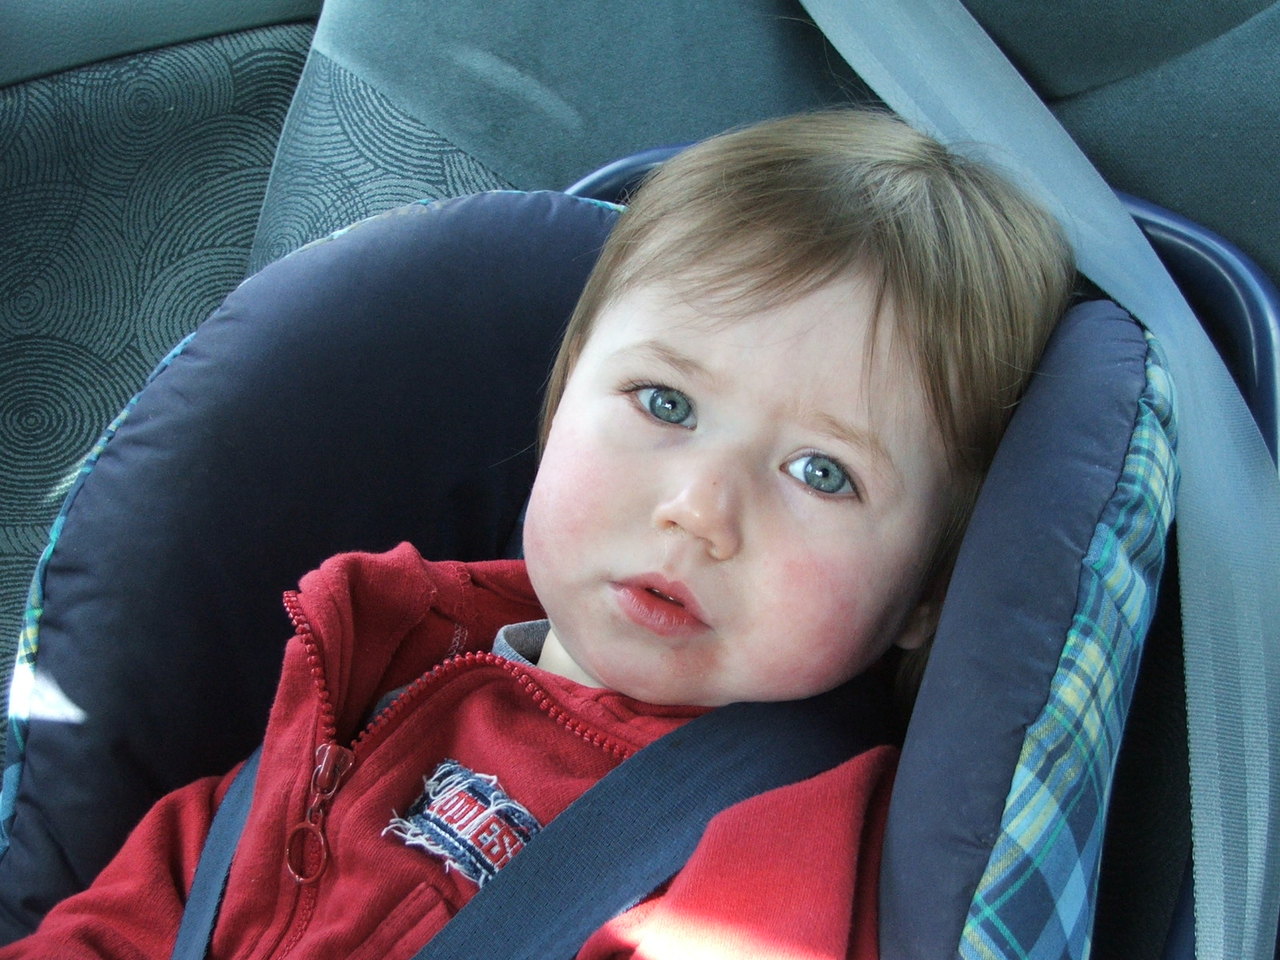 Time to check if your child safety seat is properly installed and used